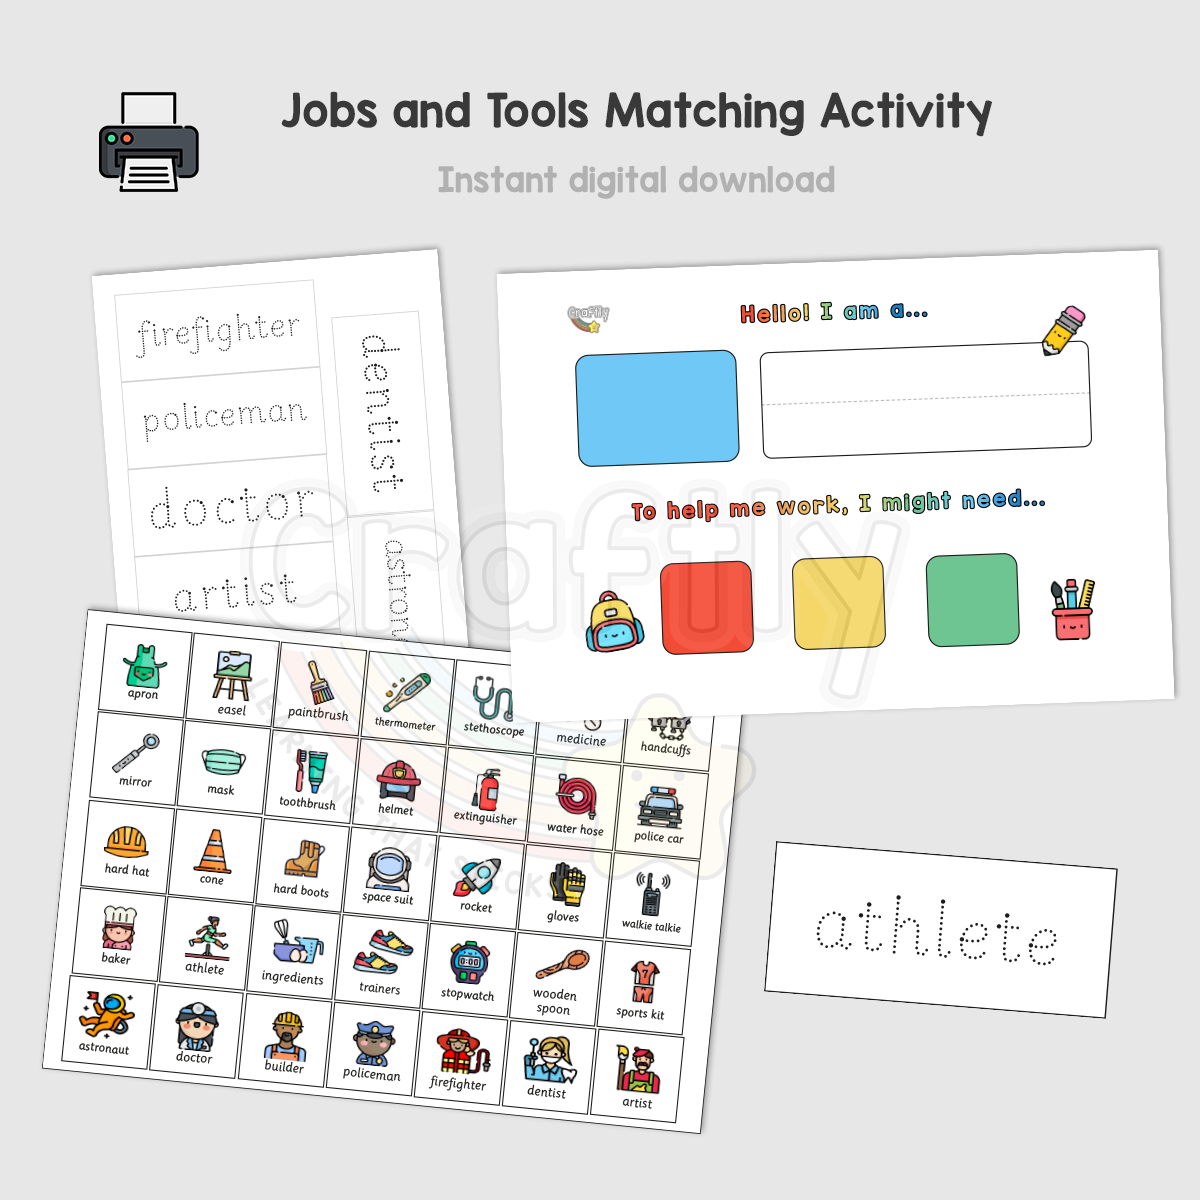 Jobs and Tools Matching Activity